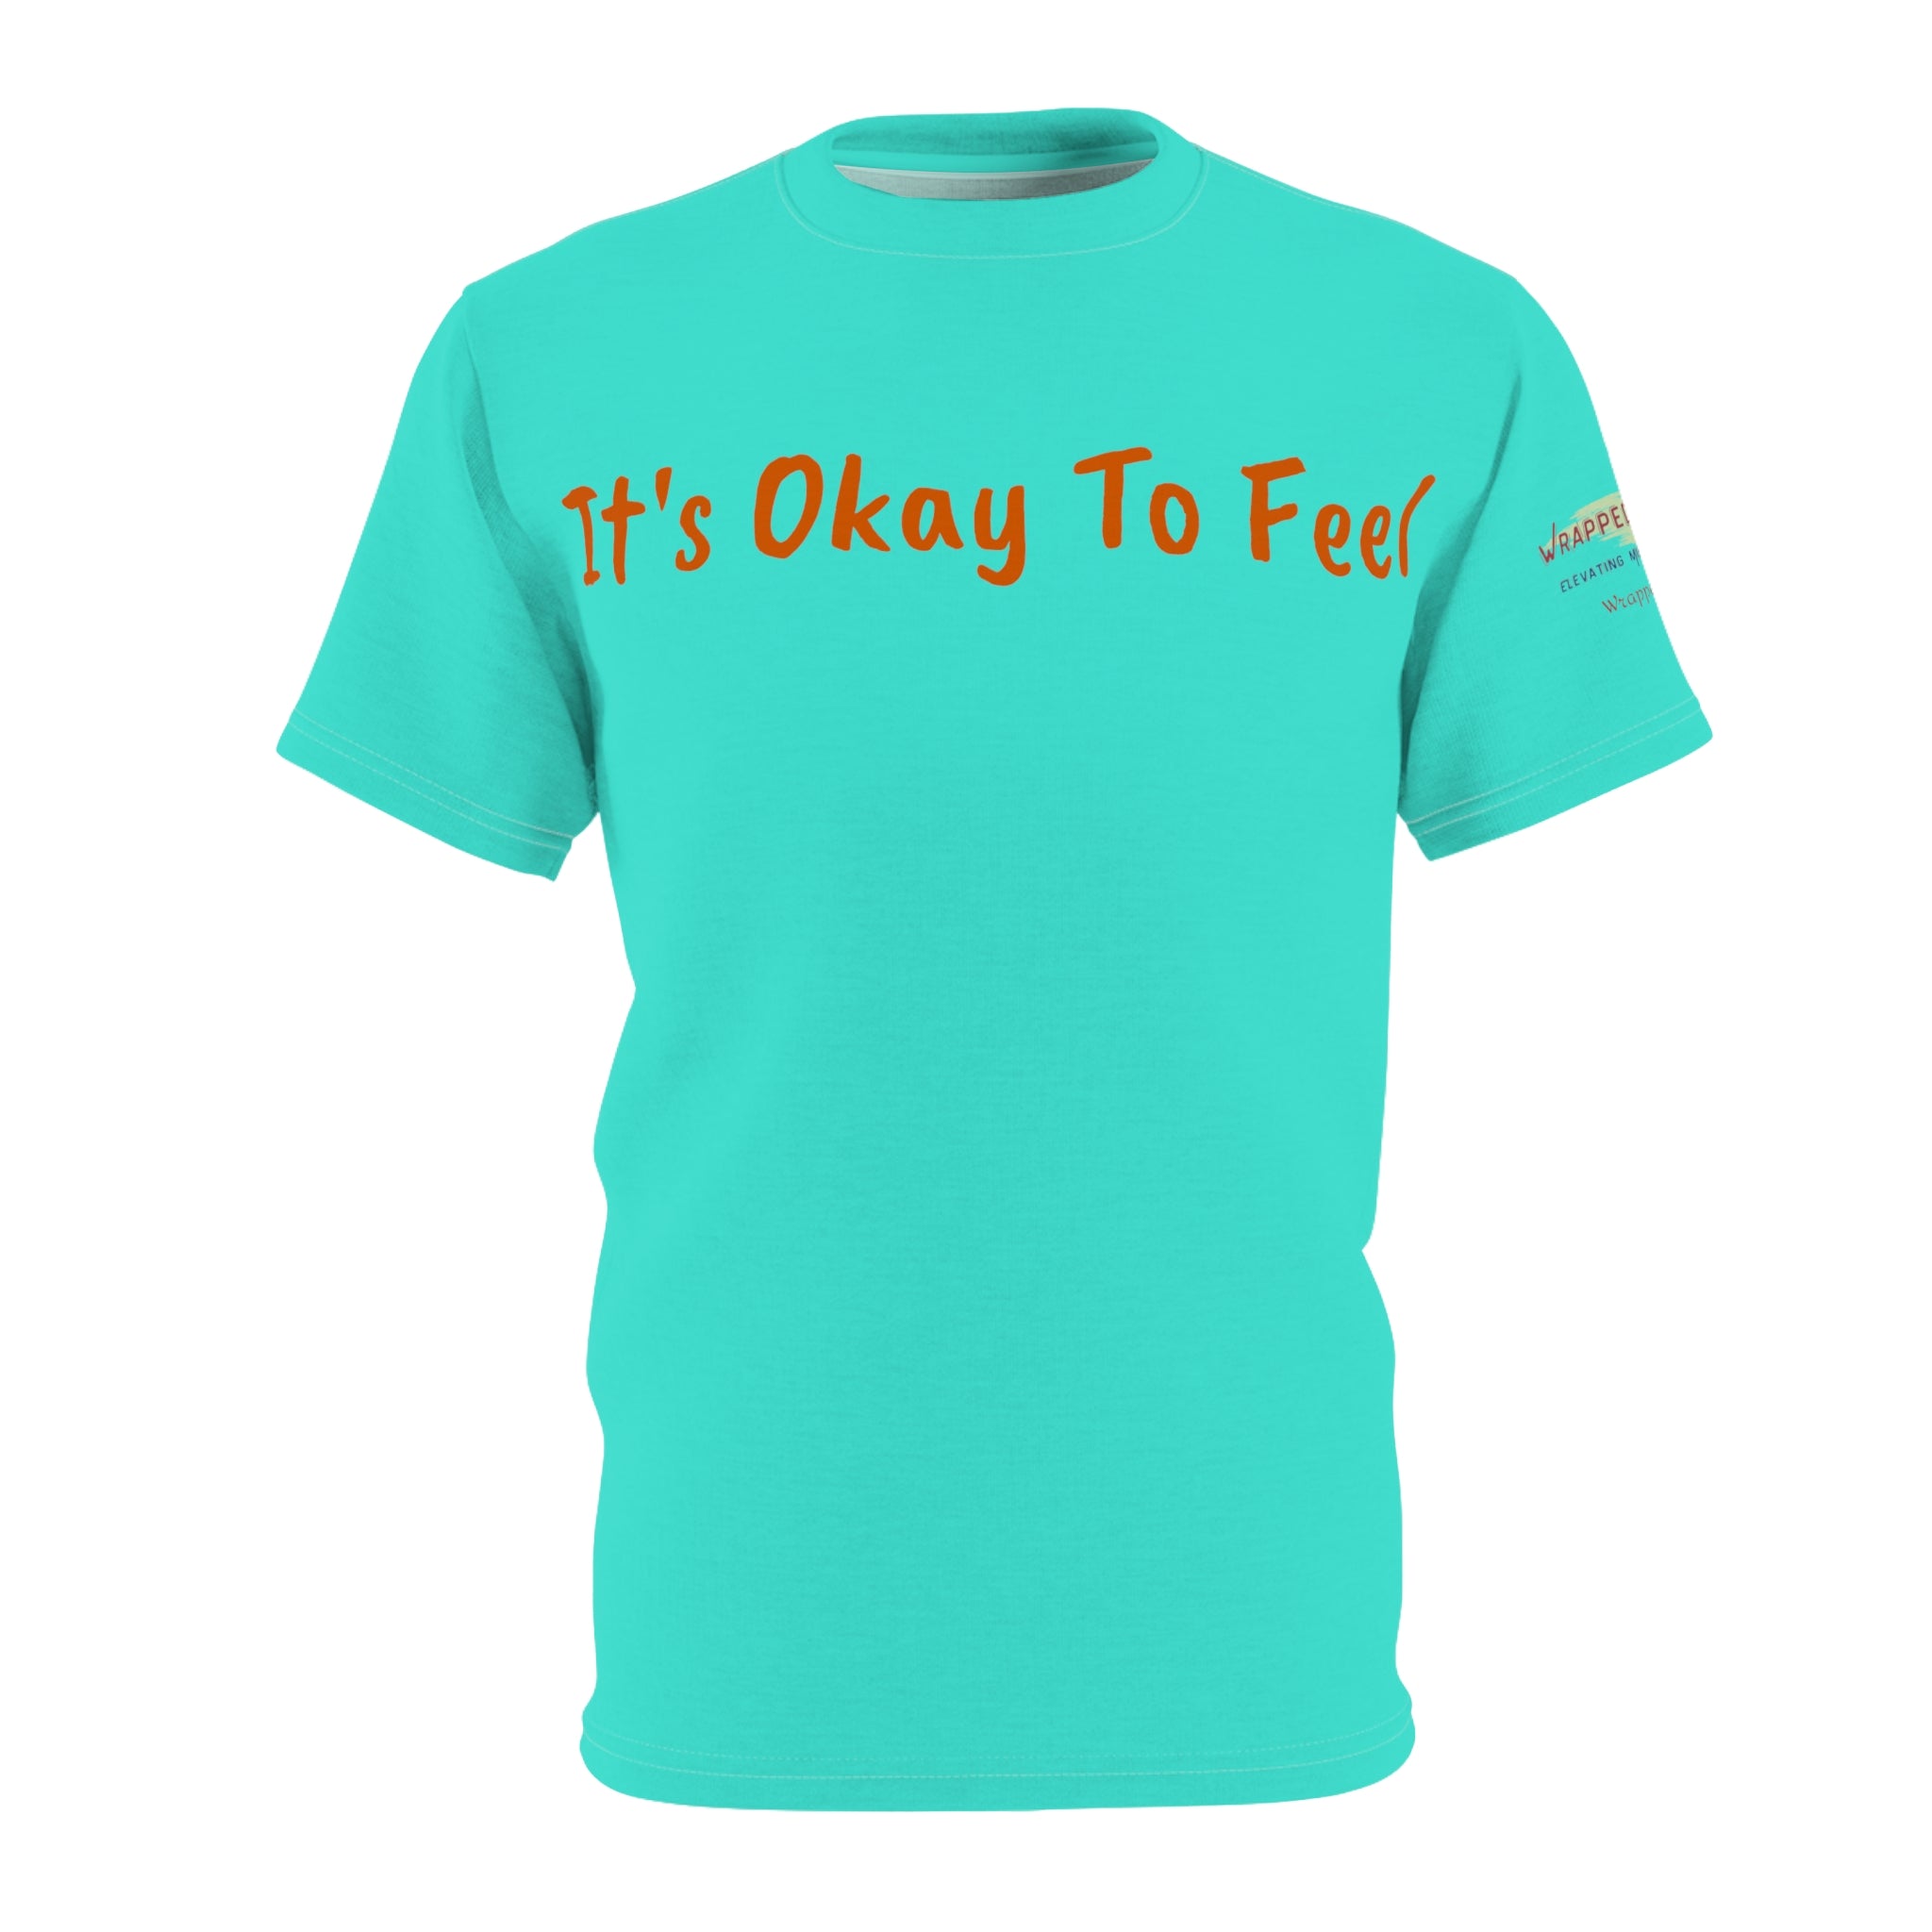 It's Okay to Feel - Unisex Cut & Sew Tee White stitching 4 oz. Athleisure Wear Comfort Cut & Sew Donation Feel Initiative Mental Health Normalization Polyester Tee Unisex All Over Prints 8334127924403847652_2048 Printify